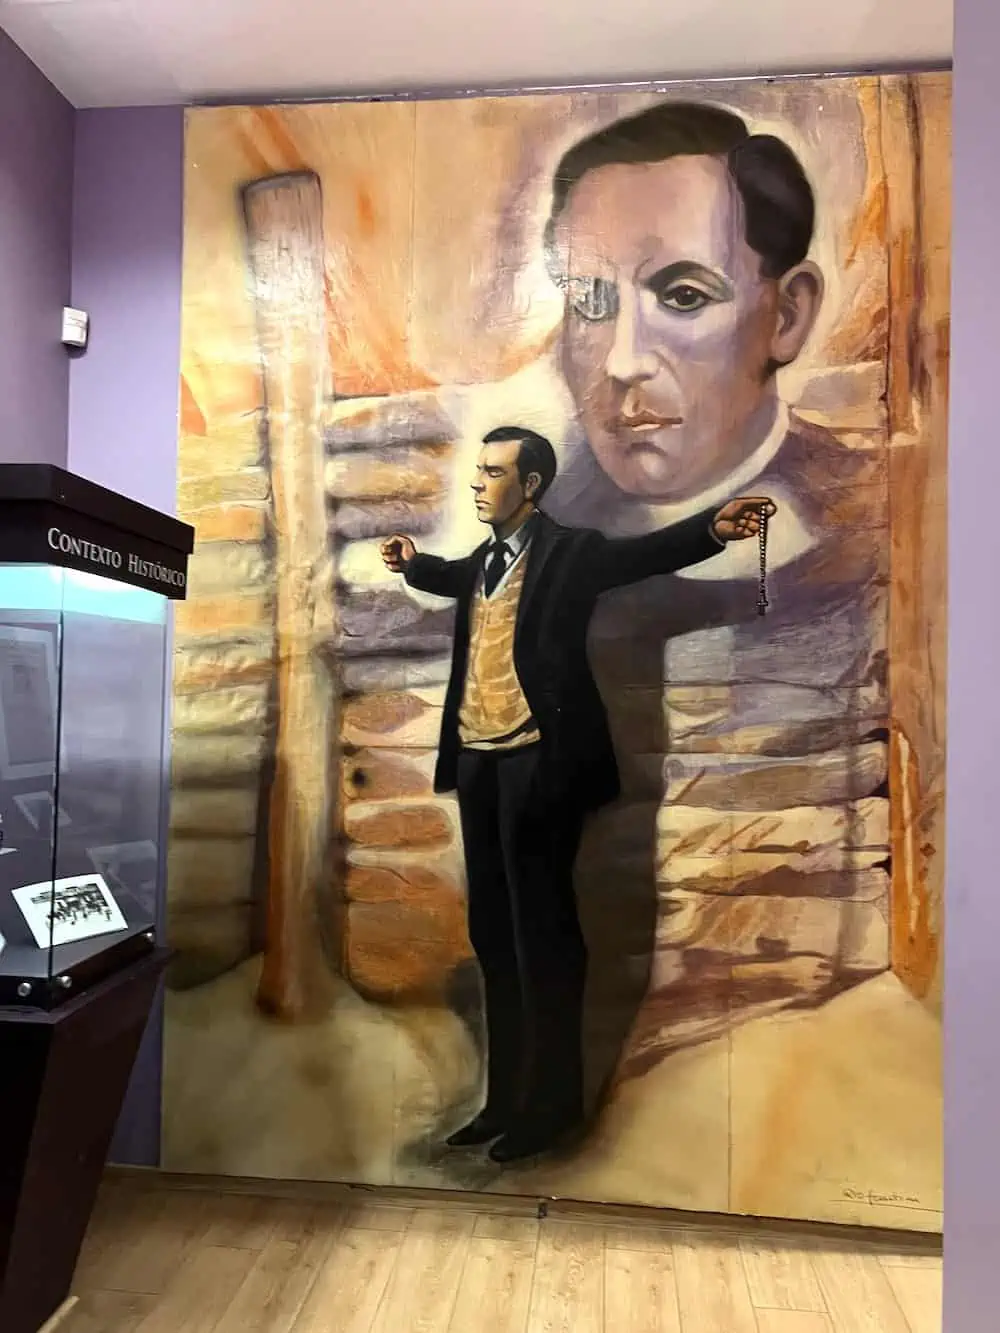 An exhibit showing Jesuit priest Father Miguel Pro at the Museo Padre Pro.